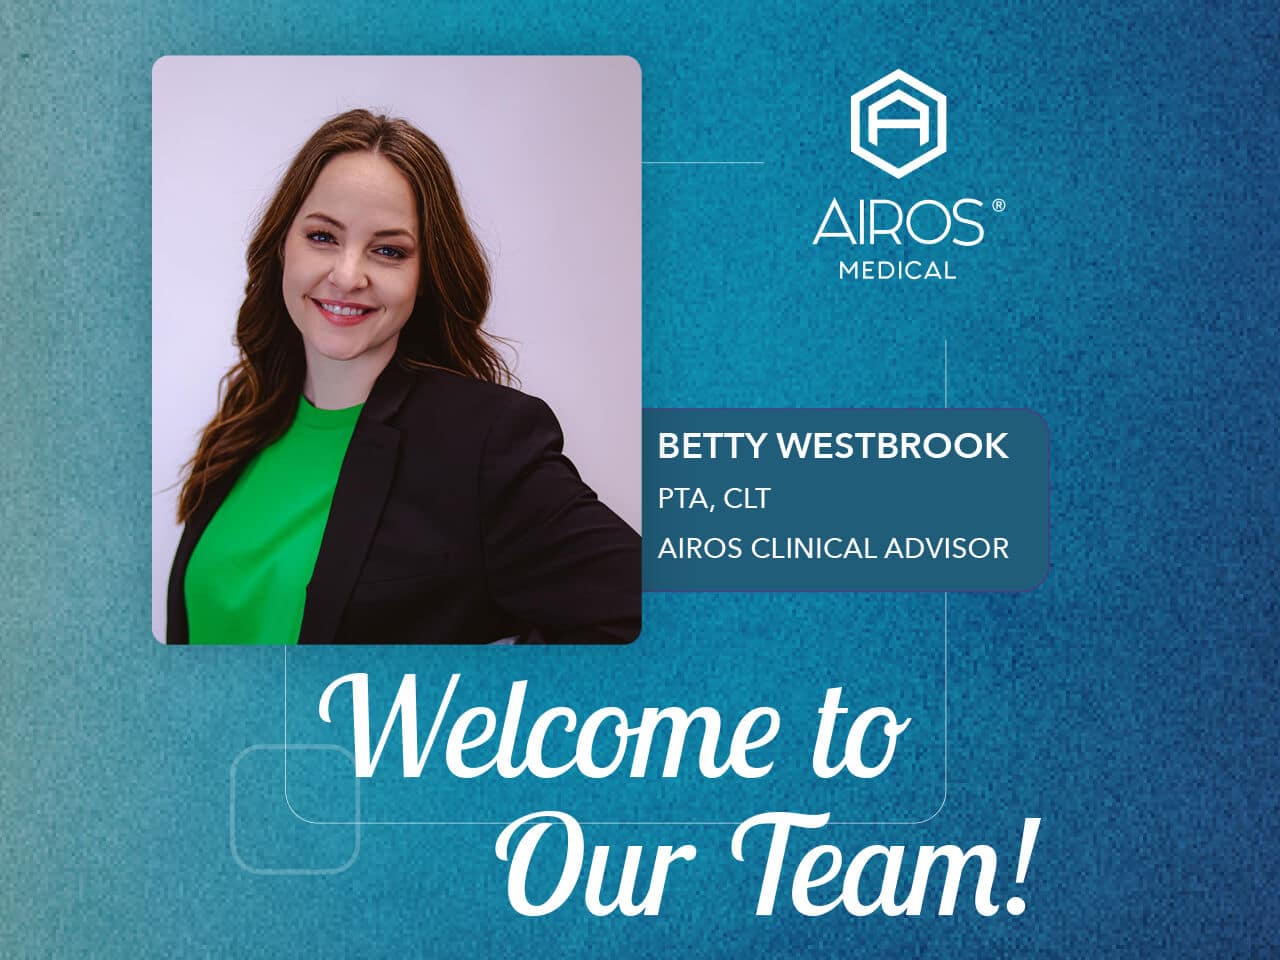 AIROS Medical Welcomes New Clinical Advisor, Betty Westbrook, PTA, CLT